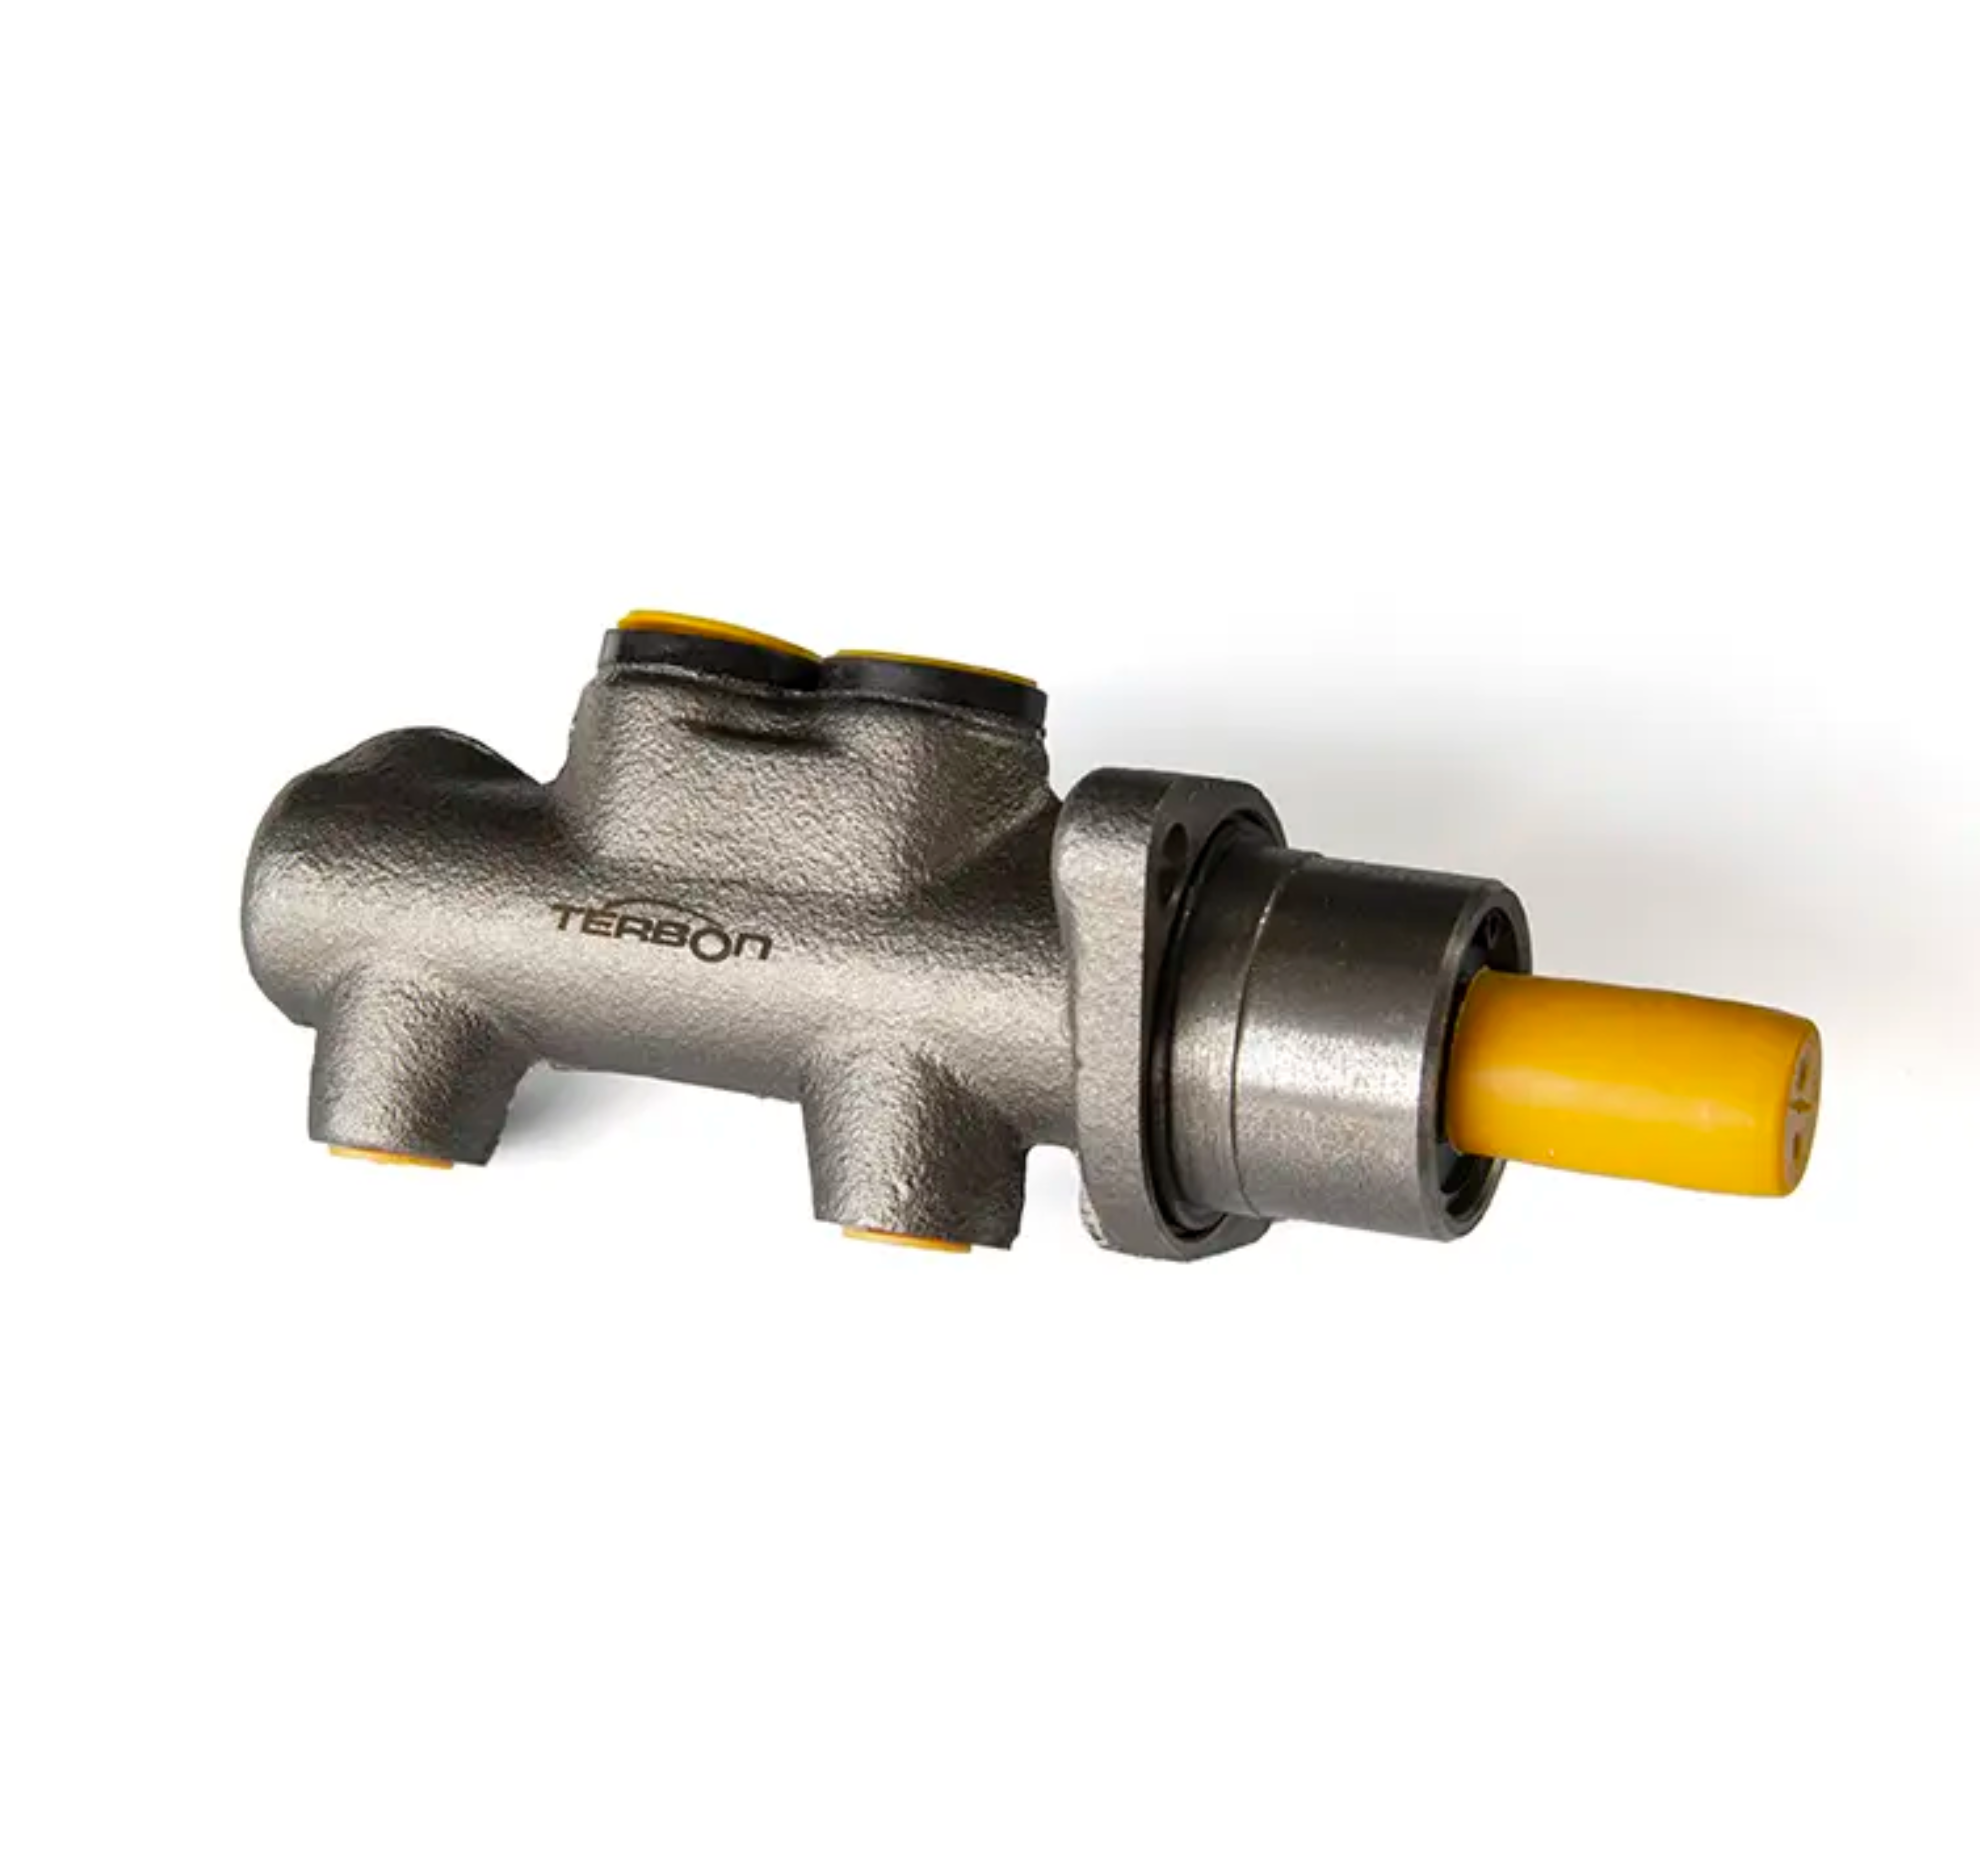 What Are The Common Symptoms Of A Failing Brake Master Cylinder?